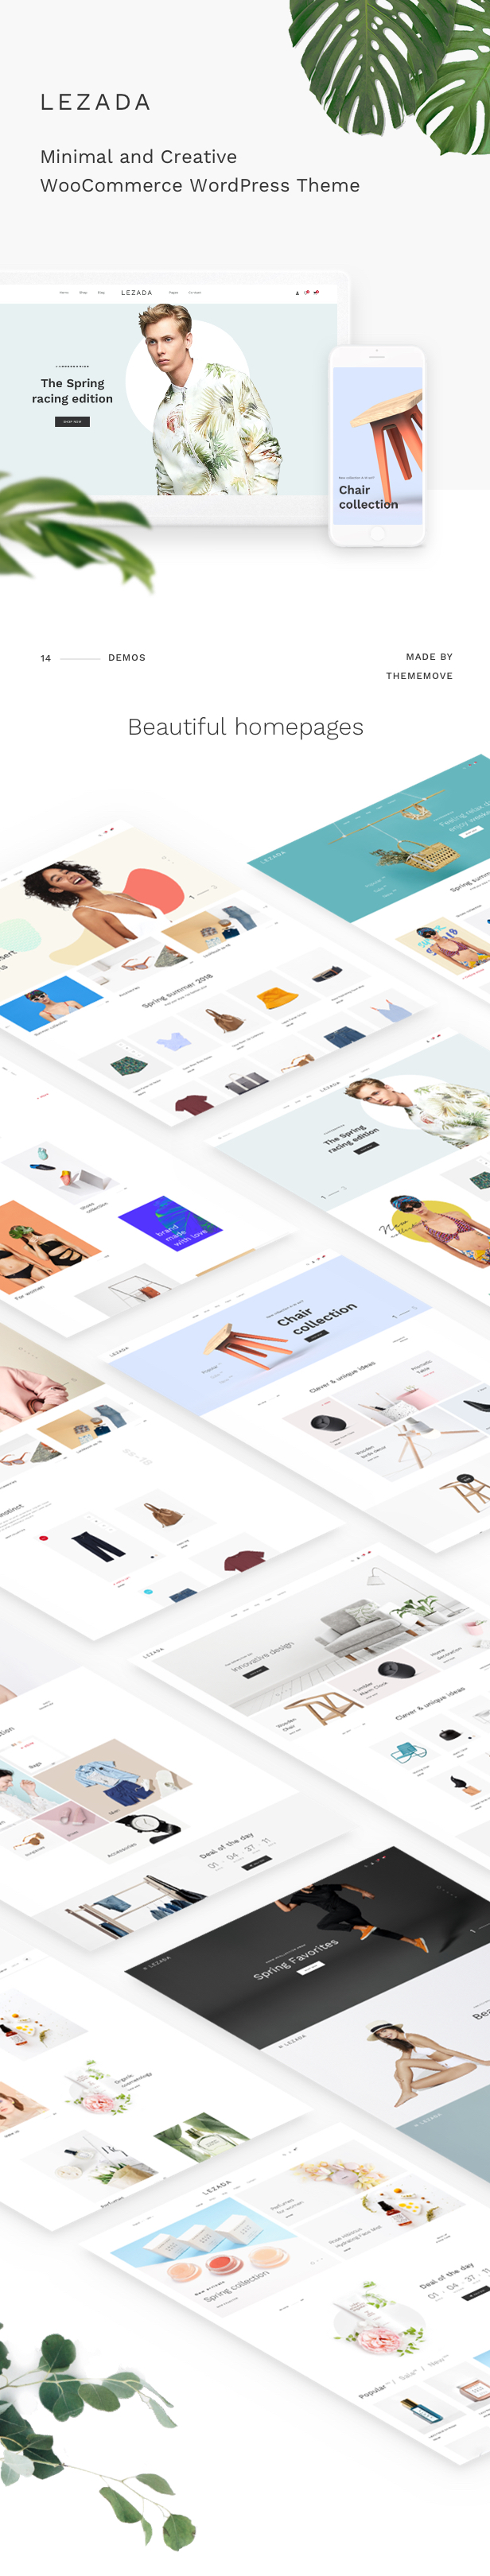 Fashion WooCommerce WordPress Theme - beautifully crafted Homepages